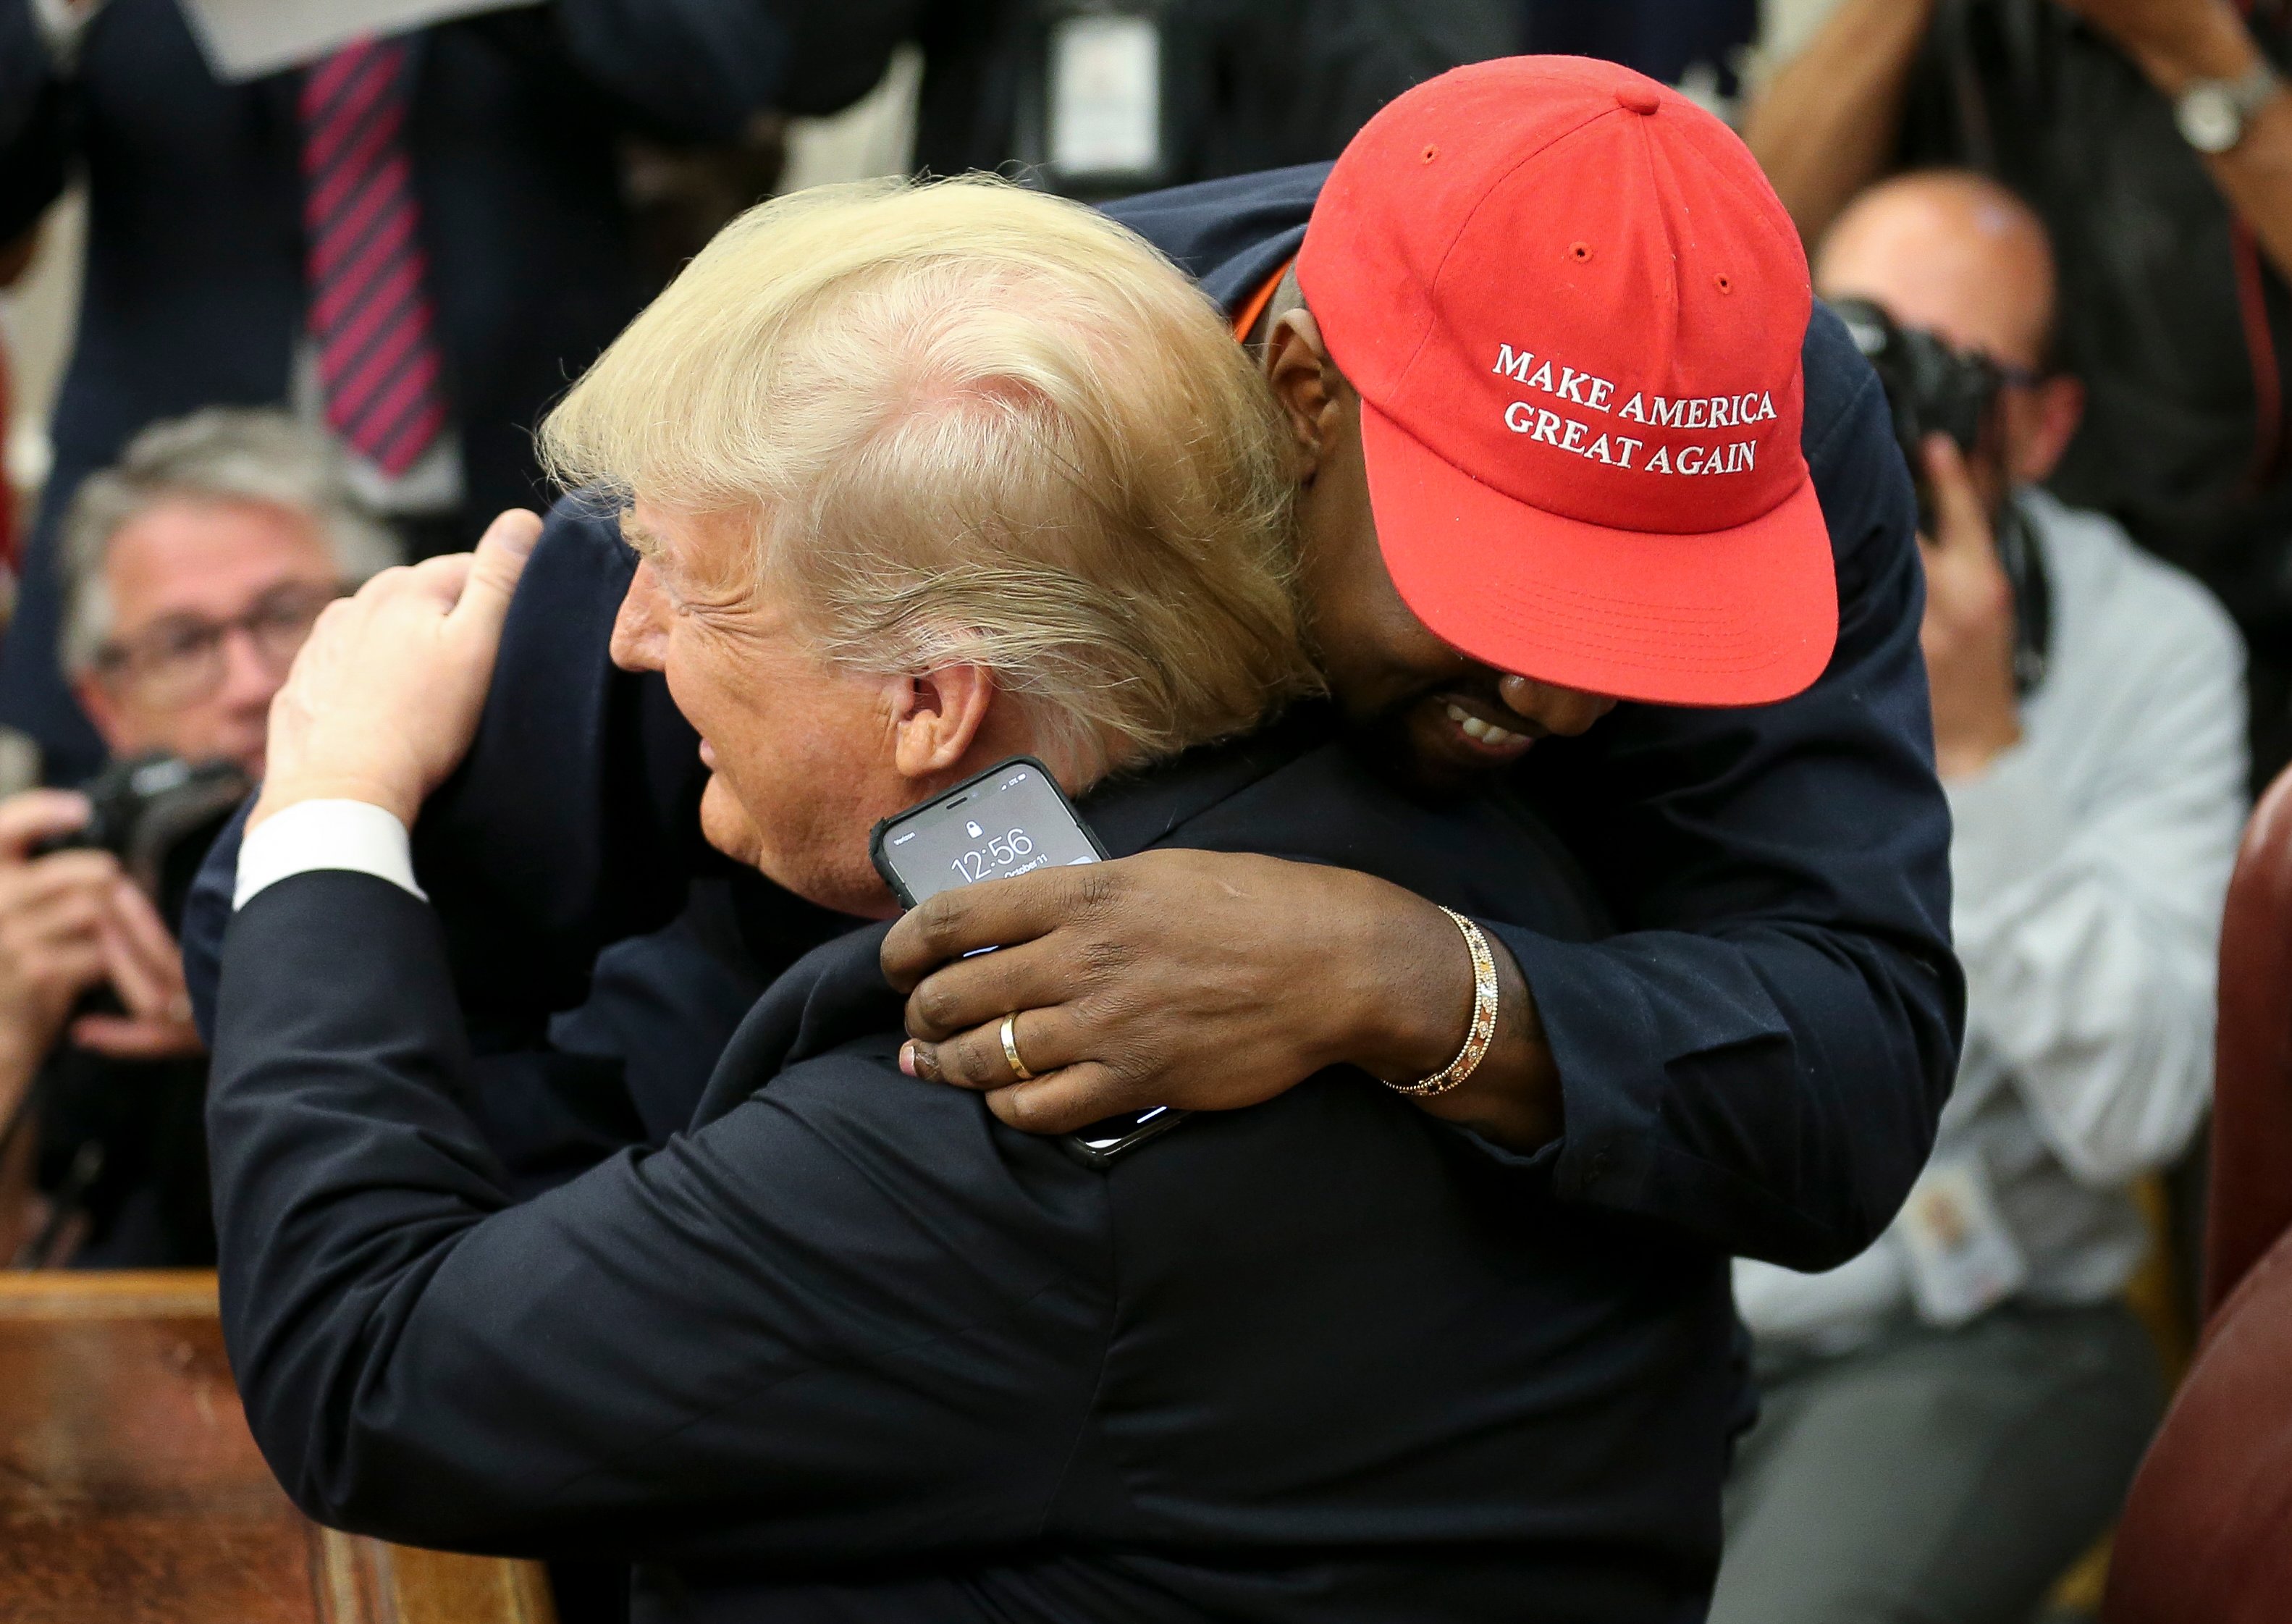 U.S. President Donald Trump hugs rapper Kanye West during a meeting in the Oval office of the White House on October 11, 2018 in Washington, DC. (Photo by Oliver Contreras - Pool/Getty Images)